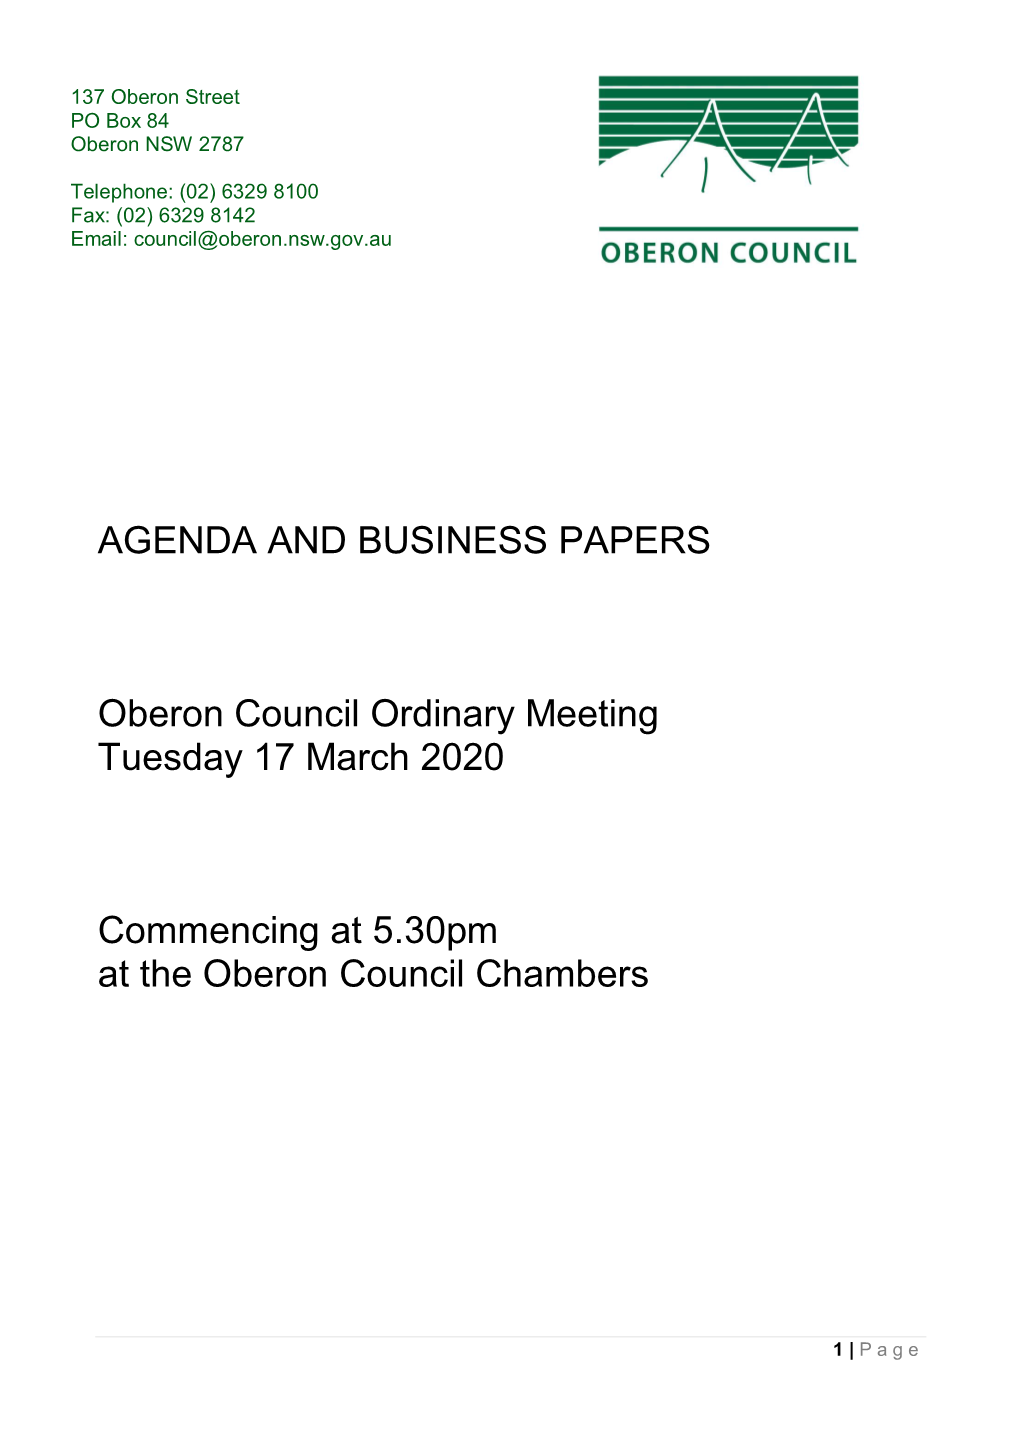 AGENDA and BUSINESS PAPERS Oberon Council Ordinary Meeting